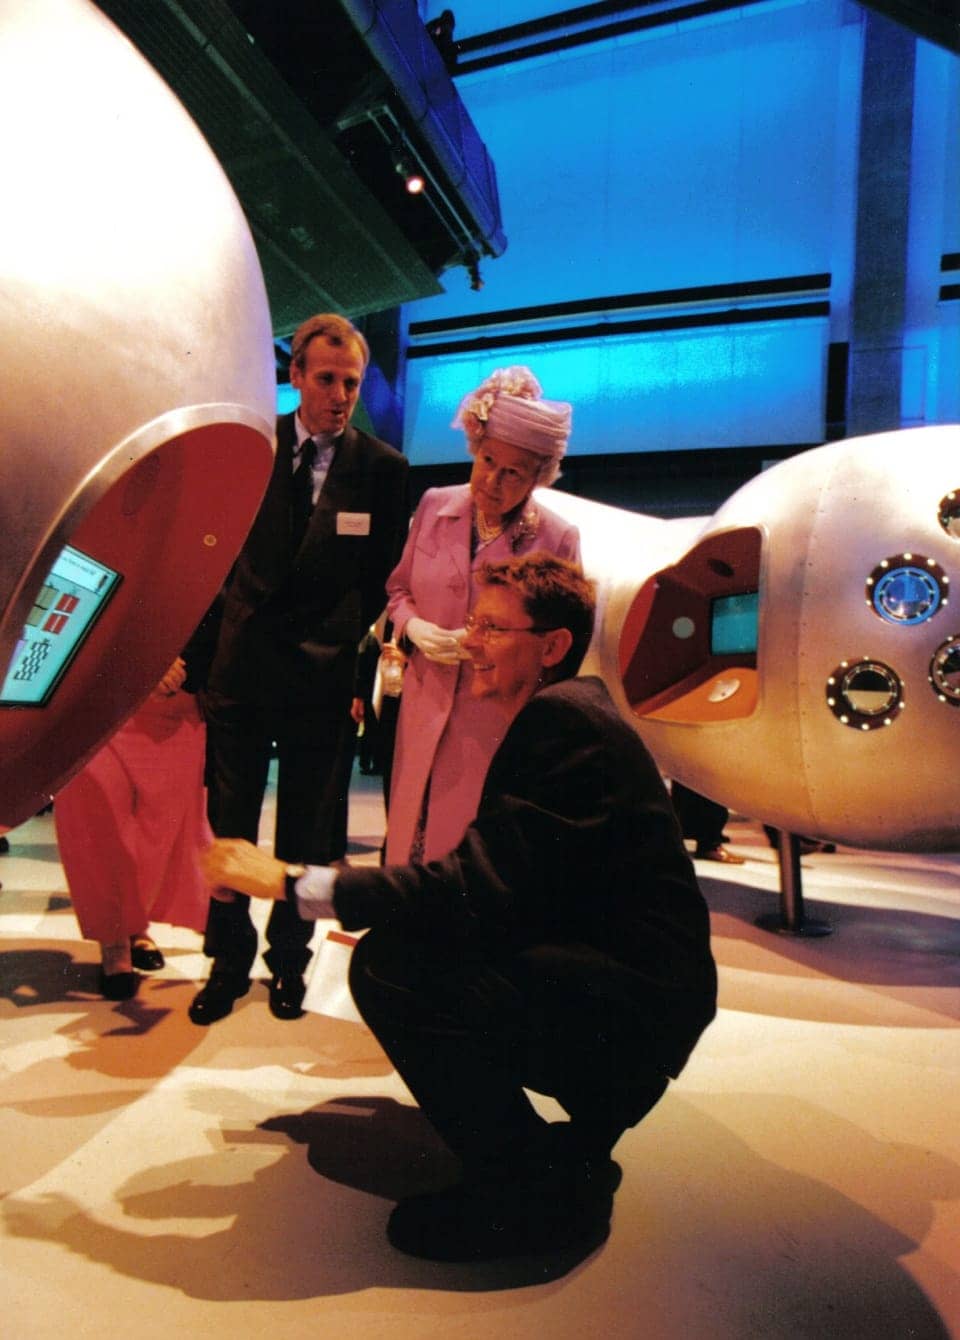 The Queen and two men using interactive computer embedded into metal structure